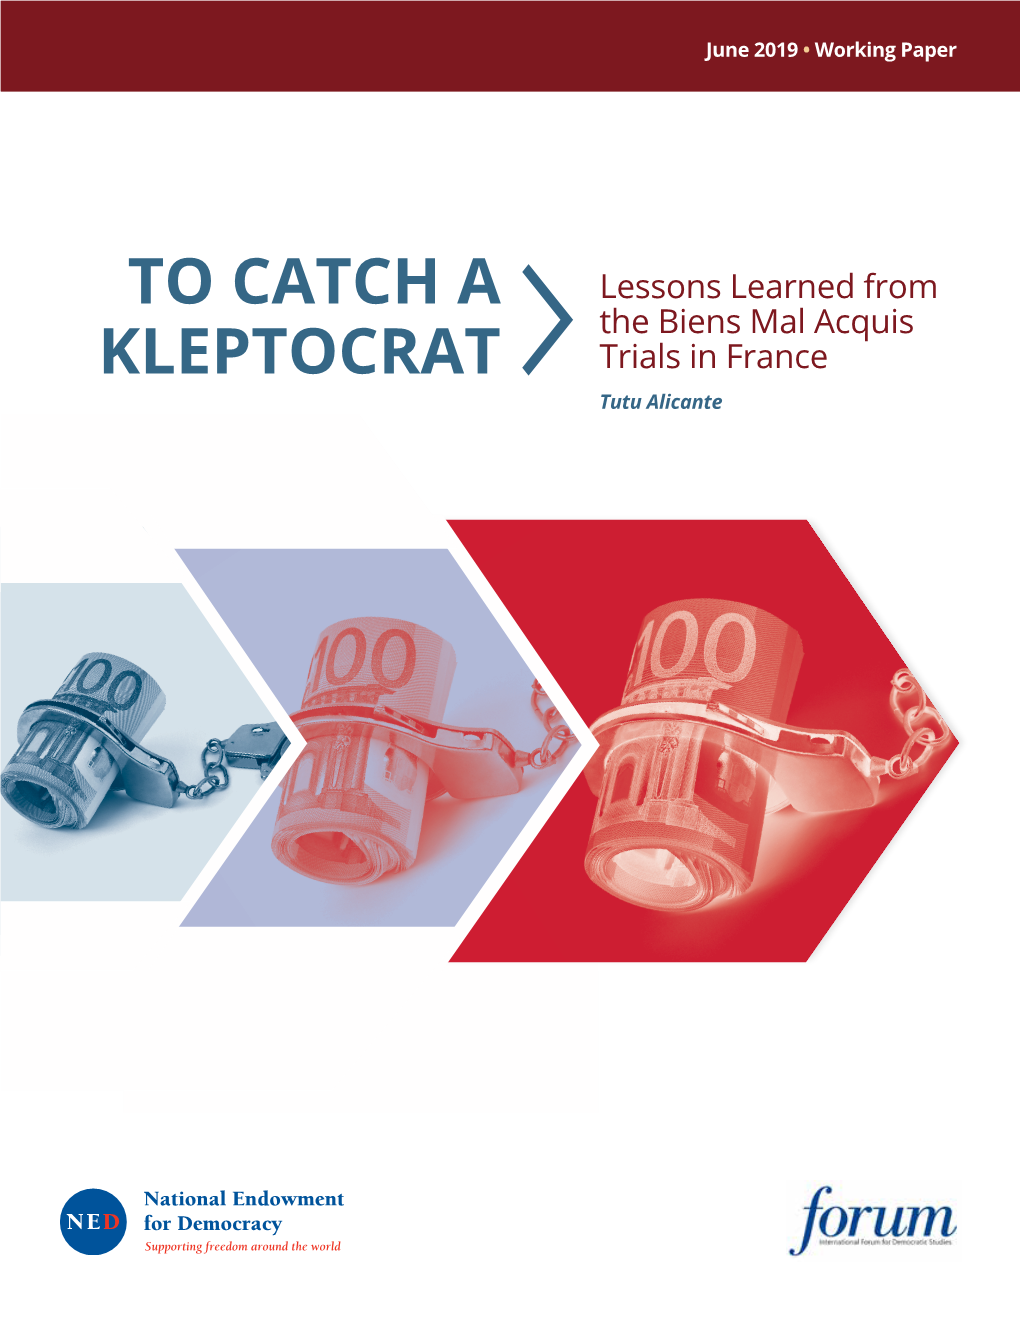 TO CATCH a KLEPTOCRAT: Lessons Learned from the Biens Mal Acquis Trials in France